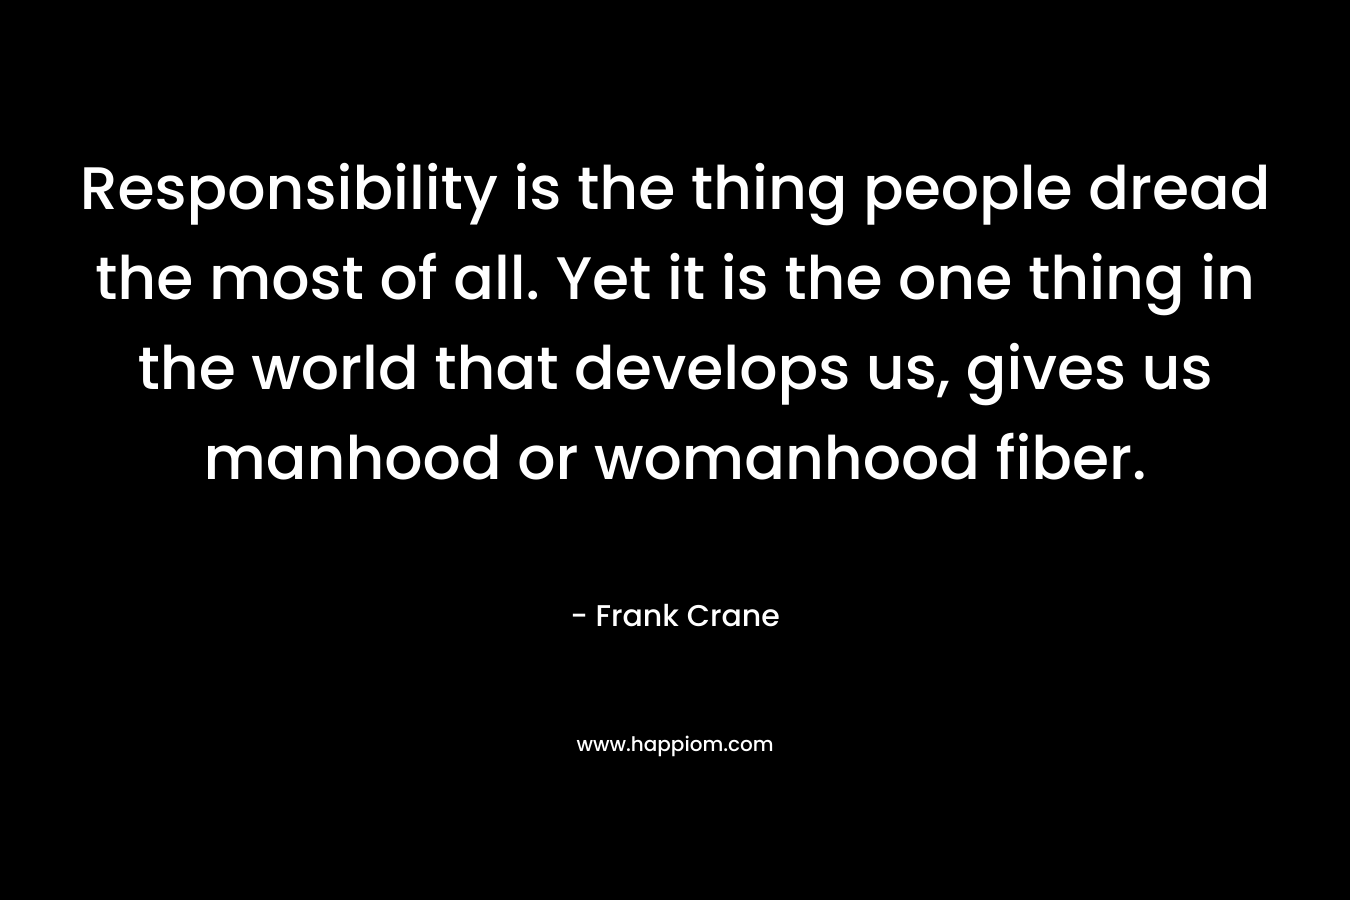 Responsibility is the thing people dread the most of all. Yet it is the one thing in the world that develops us, gives us manhood or womanhood fiber. – Frank Crane